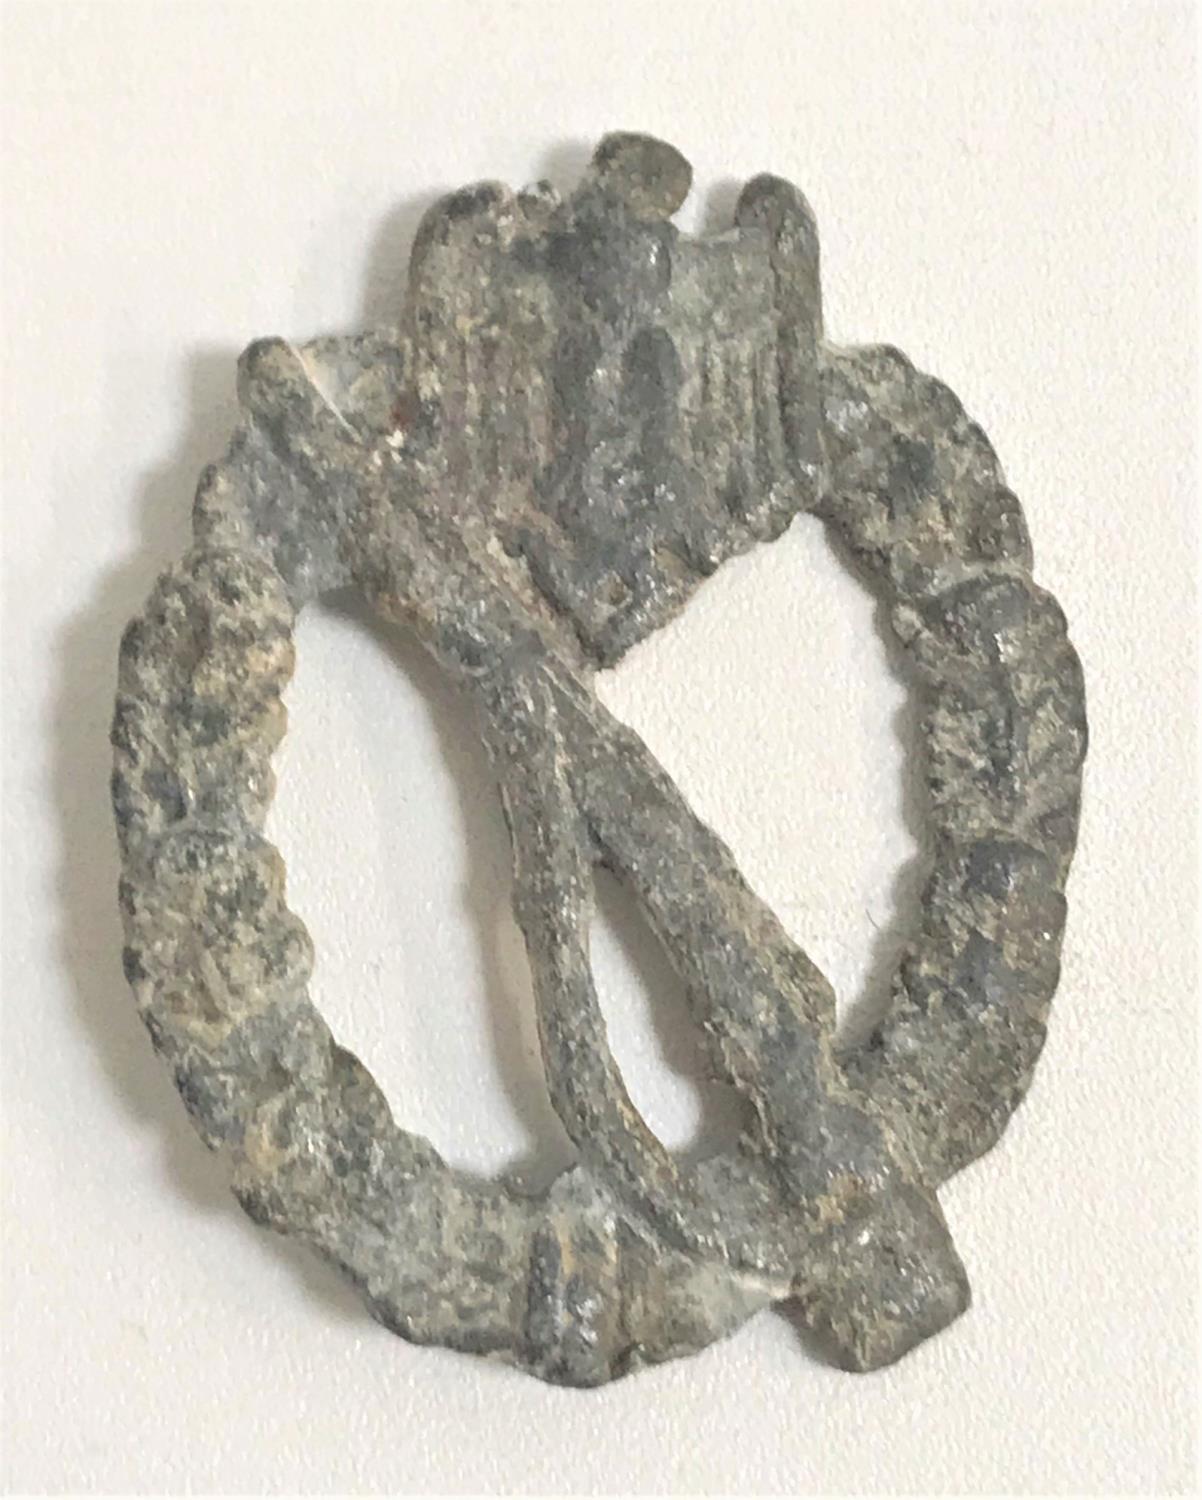 GERMAN INFANTRY ASSAULT BADGE from WWII in lead